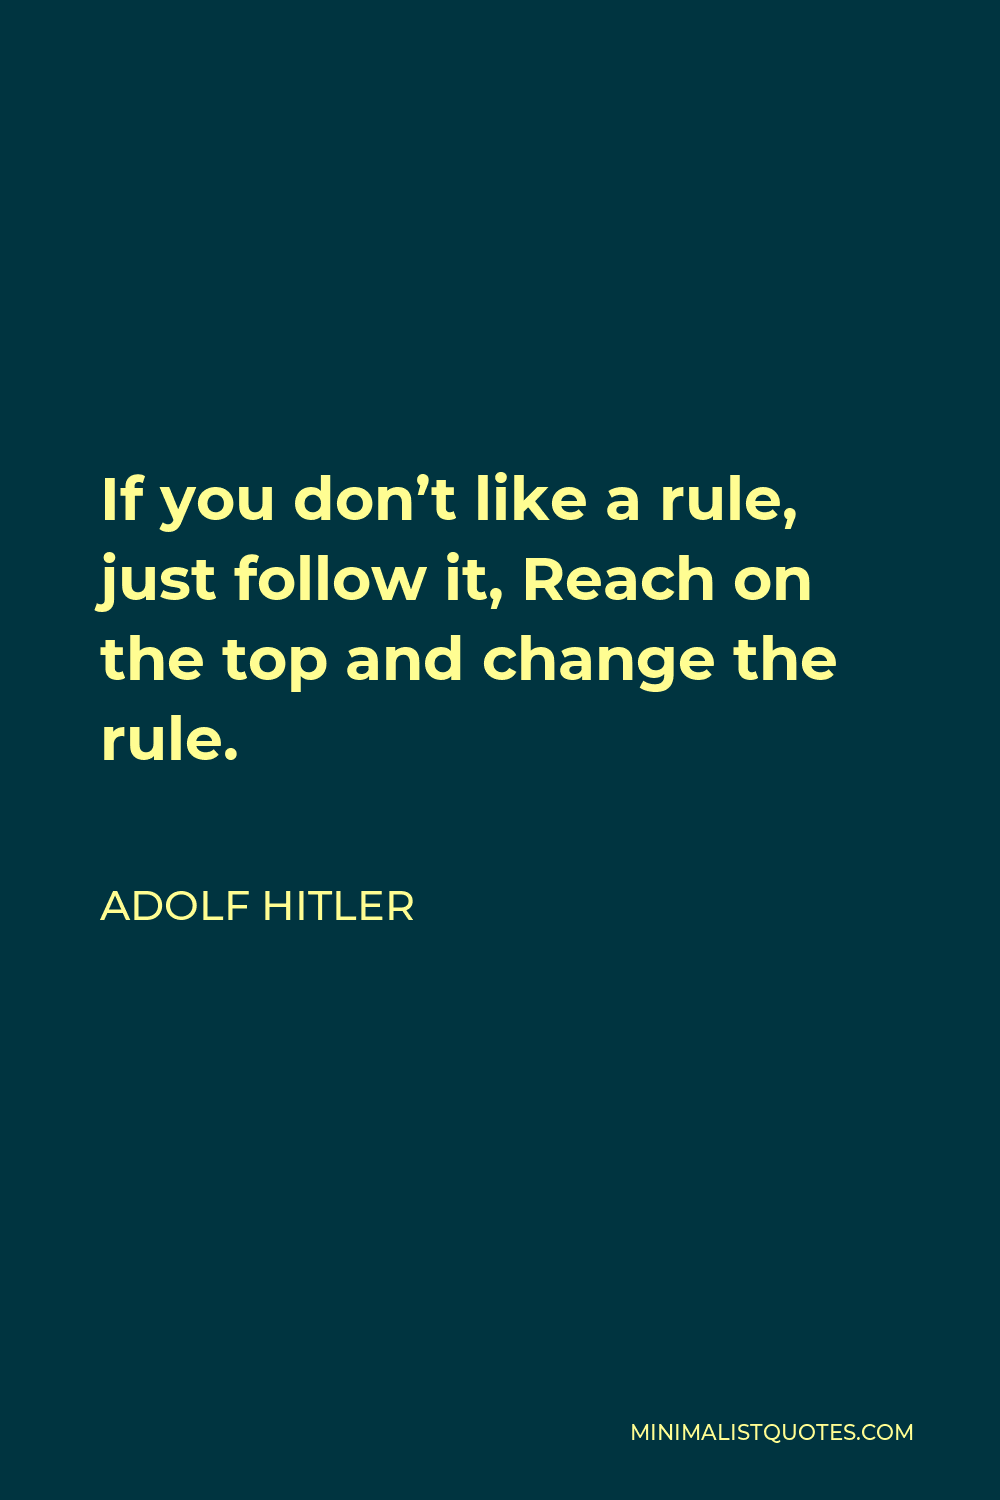 Adolf Hitler Quote: If you don't like a rule, just follow it, Reach on ...